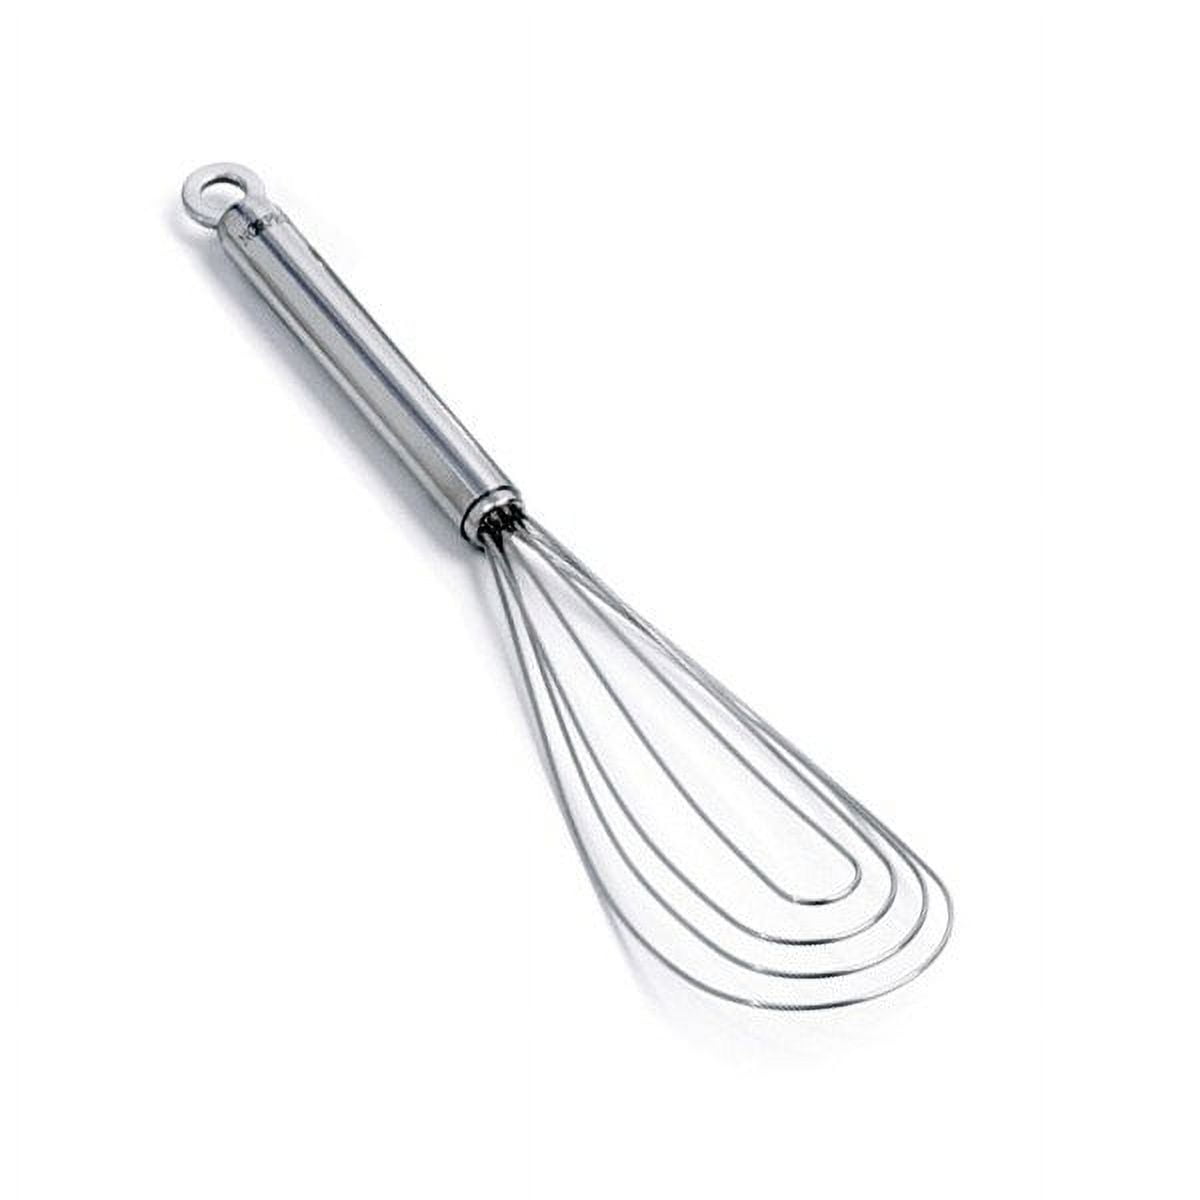 Nilehome Whisk Commercial Whisks Stainless Steel & Silicone Non-Stick  Coated Sm